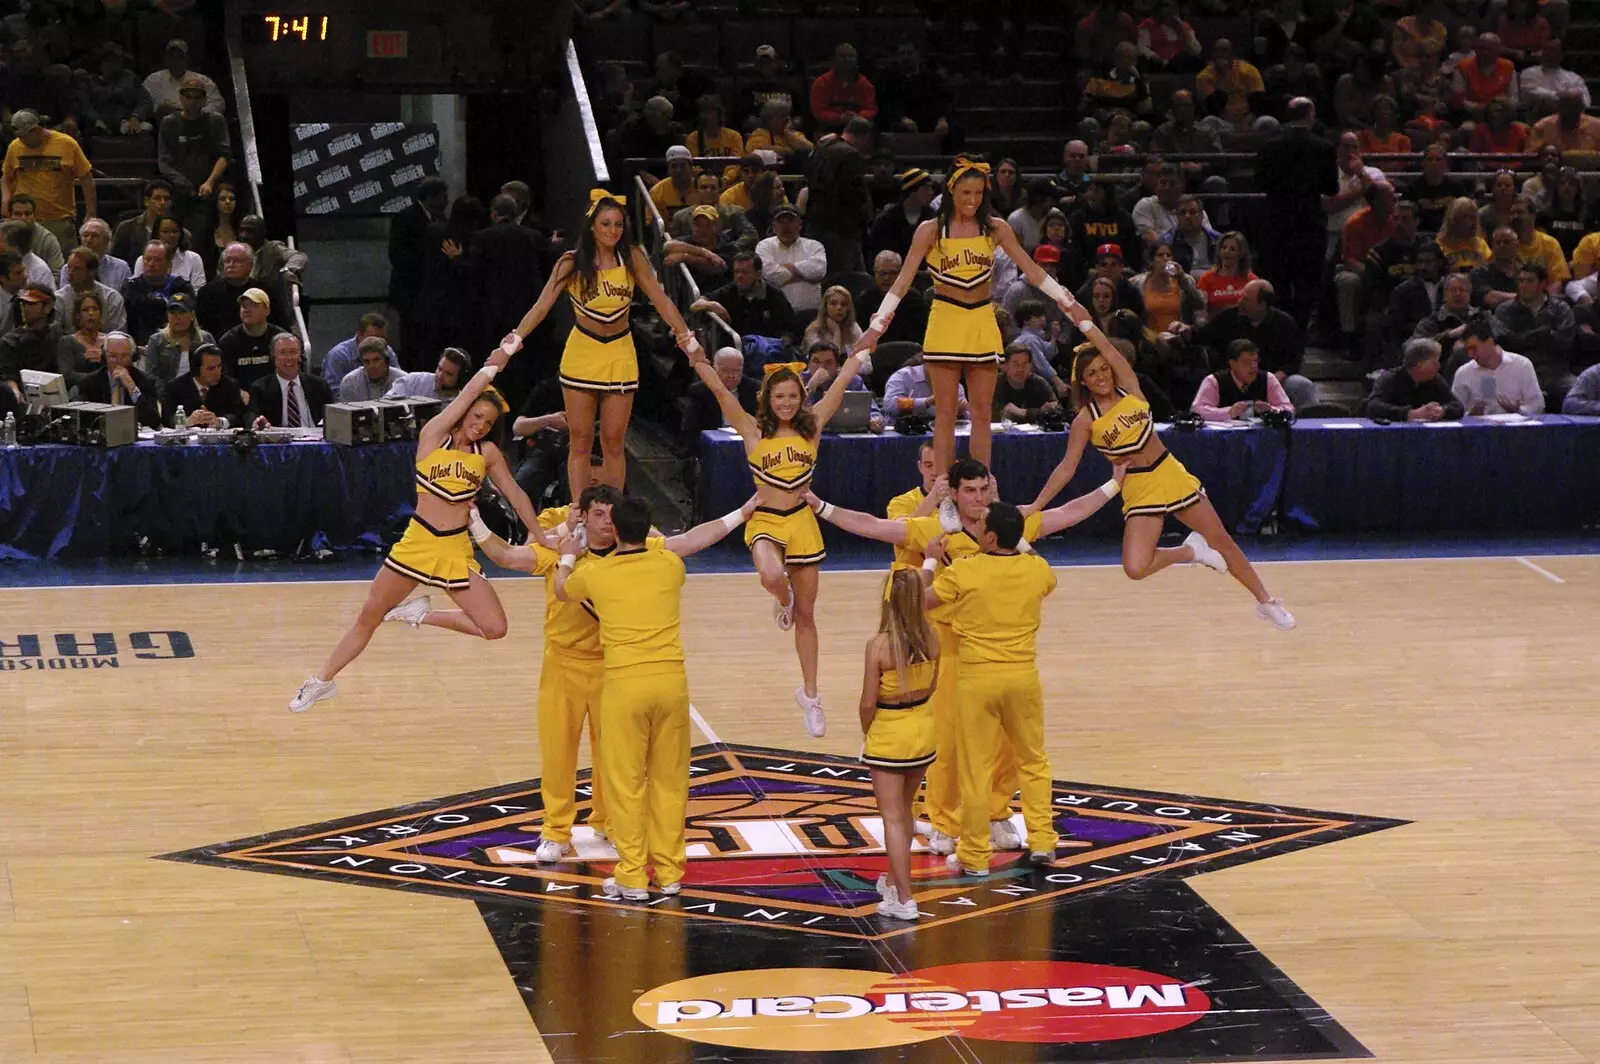 West Virginia's cheerleaders do some acrobatics, from Liberty Island, A Helicopter Trip and Madison Square Basketball, New York, US - 27th March 2007